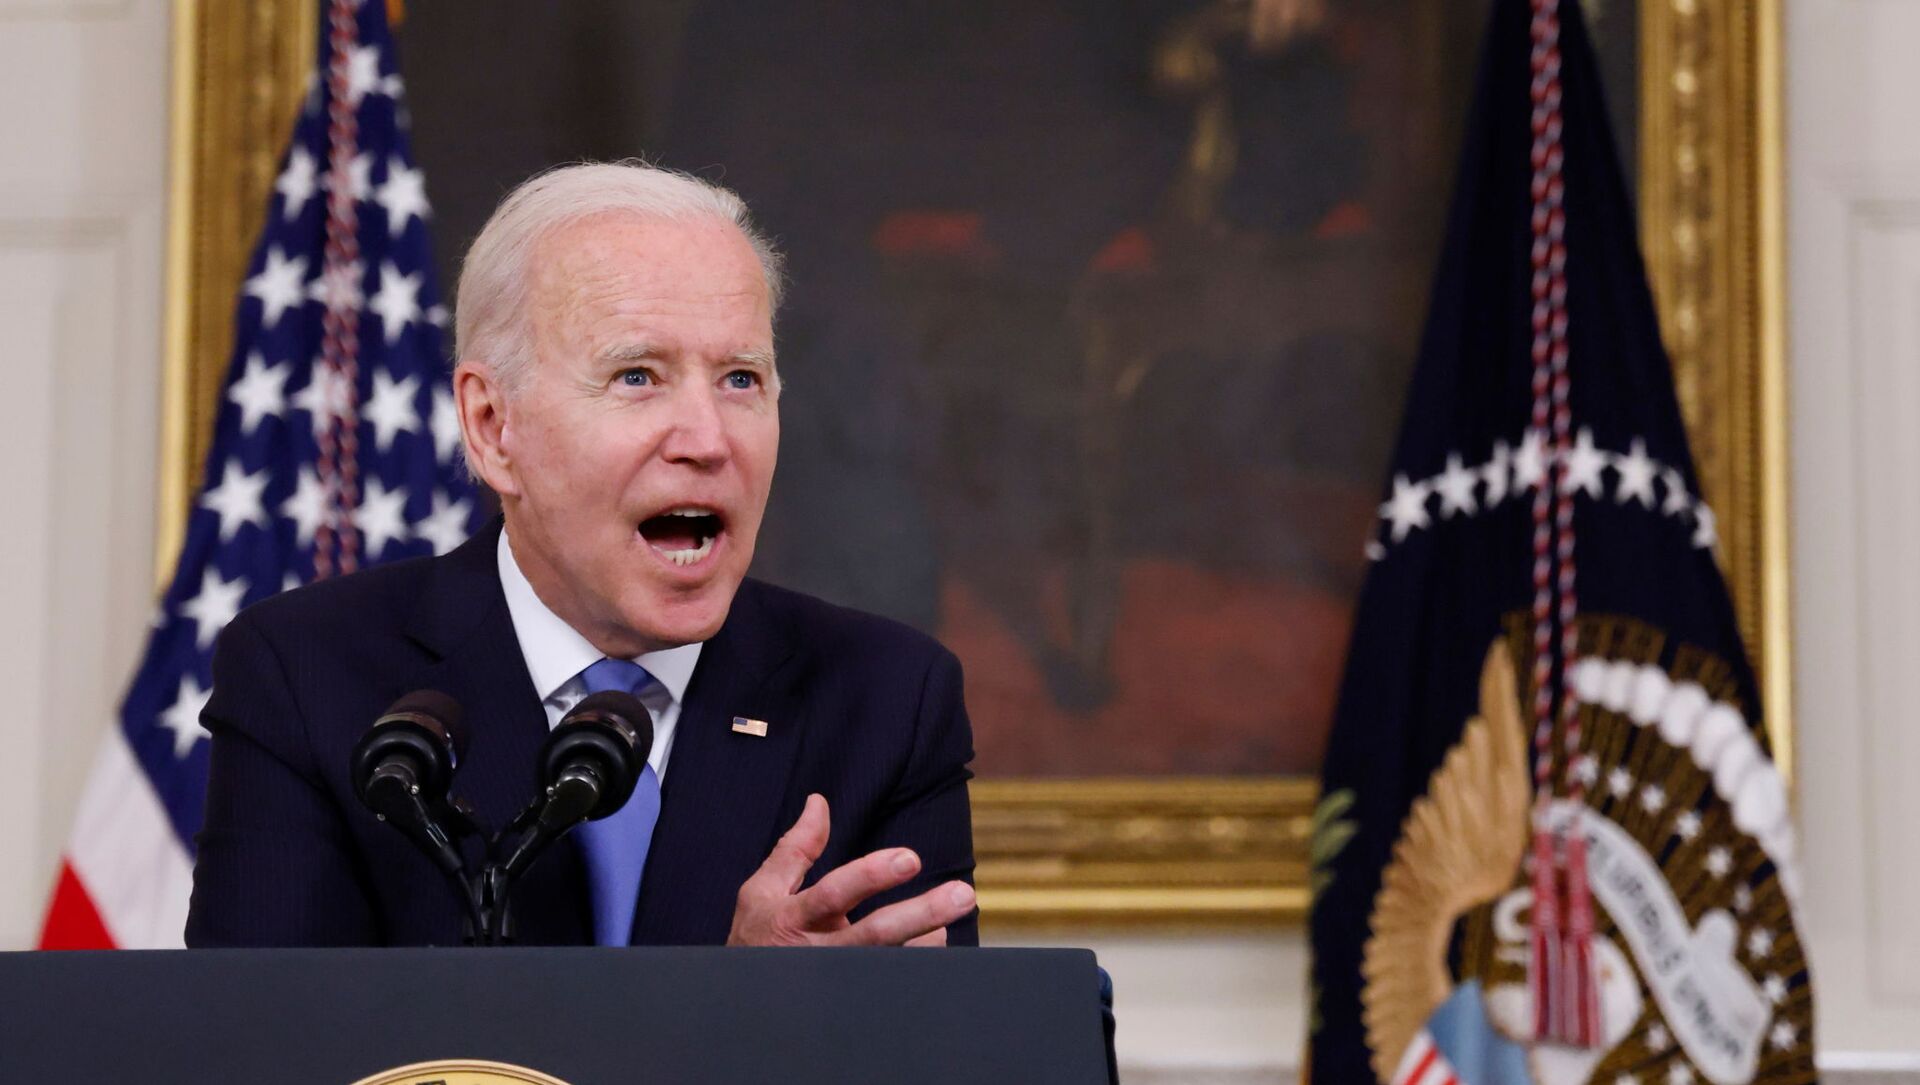 U.S. President Joe Biden gestures as he delivers remarks on the state of his American Rescue Plan from the State Dining Room at the White House in Washington, D.C., U.S., May 5, 2021 - Sputnik International, 1920, 06.05.2021